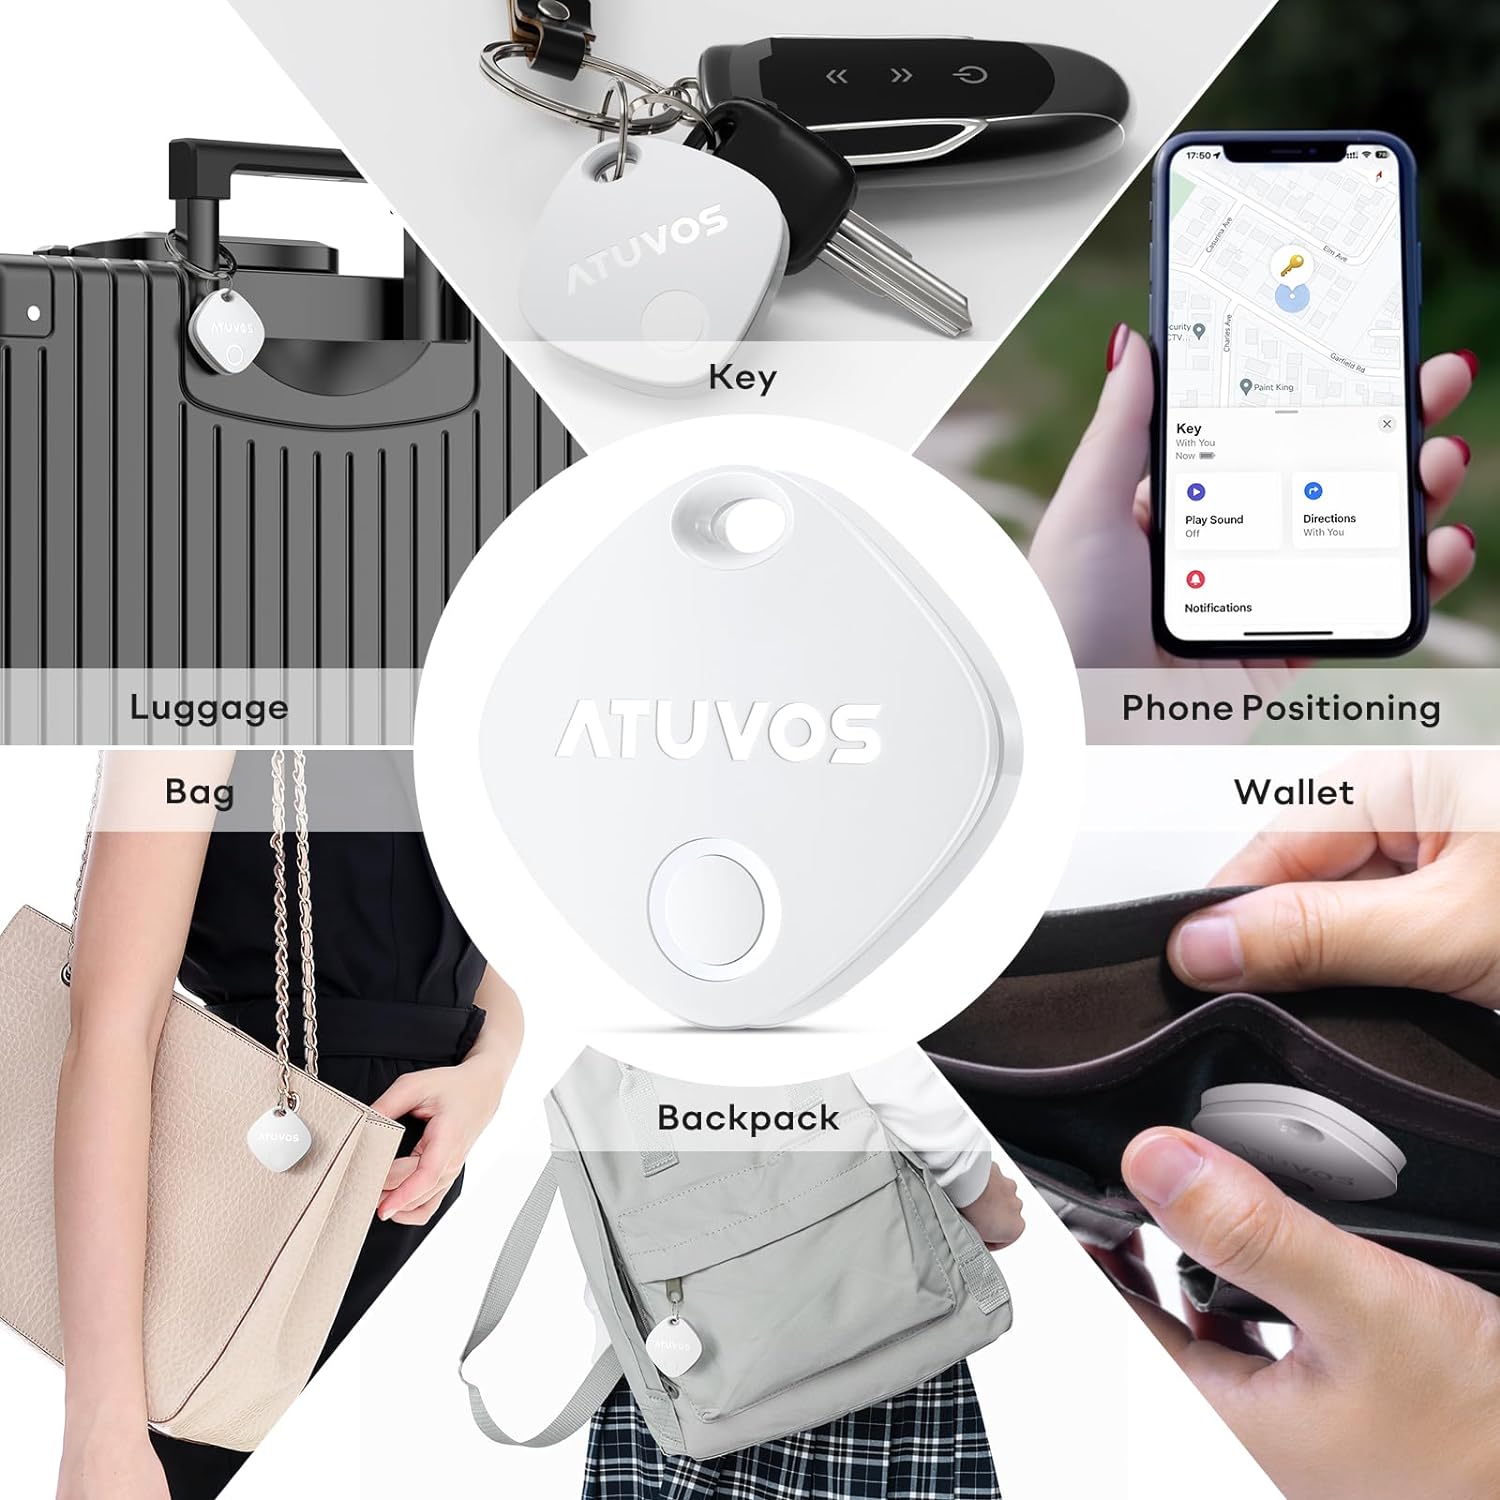 ATUVOS Bluetooth Tracker, Key Finder, Item Locator for Keys, Wallets, Luggage, up to 400ft. Range, Compatible with Apple Find My(4Pack)